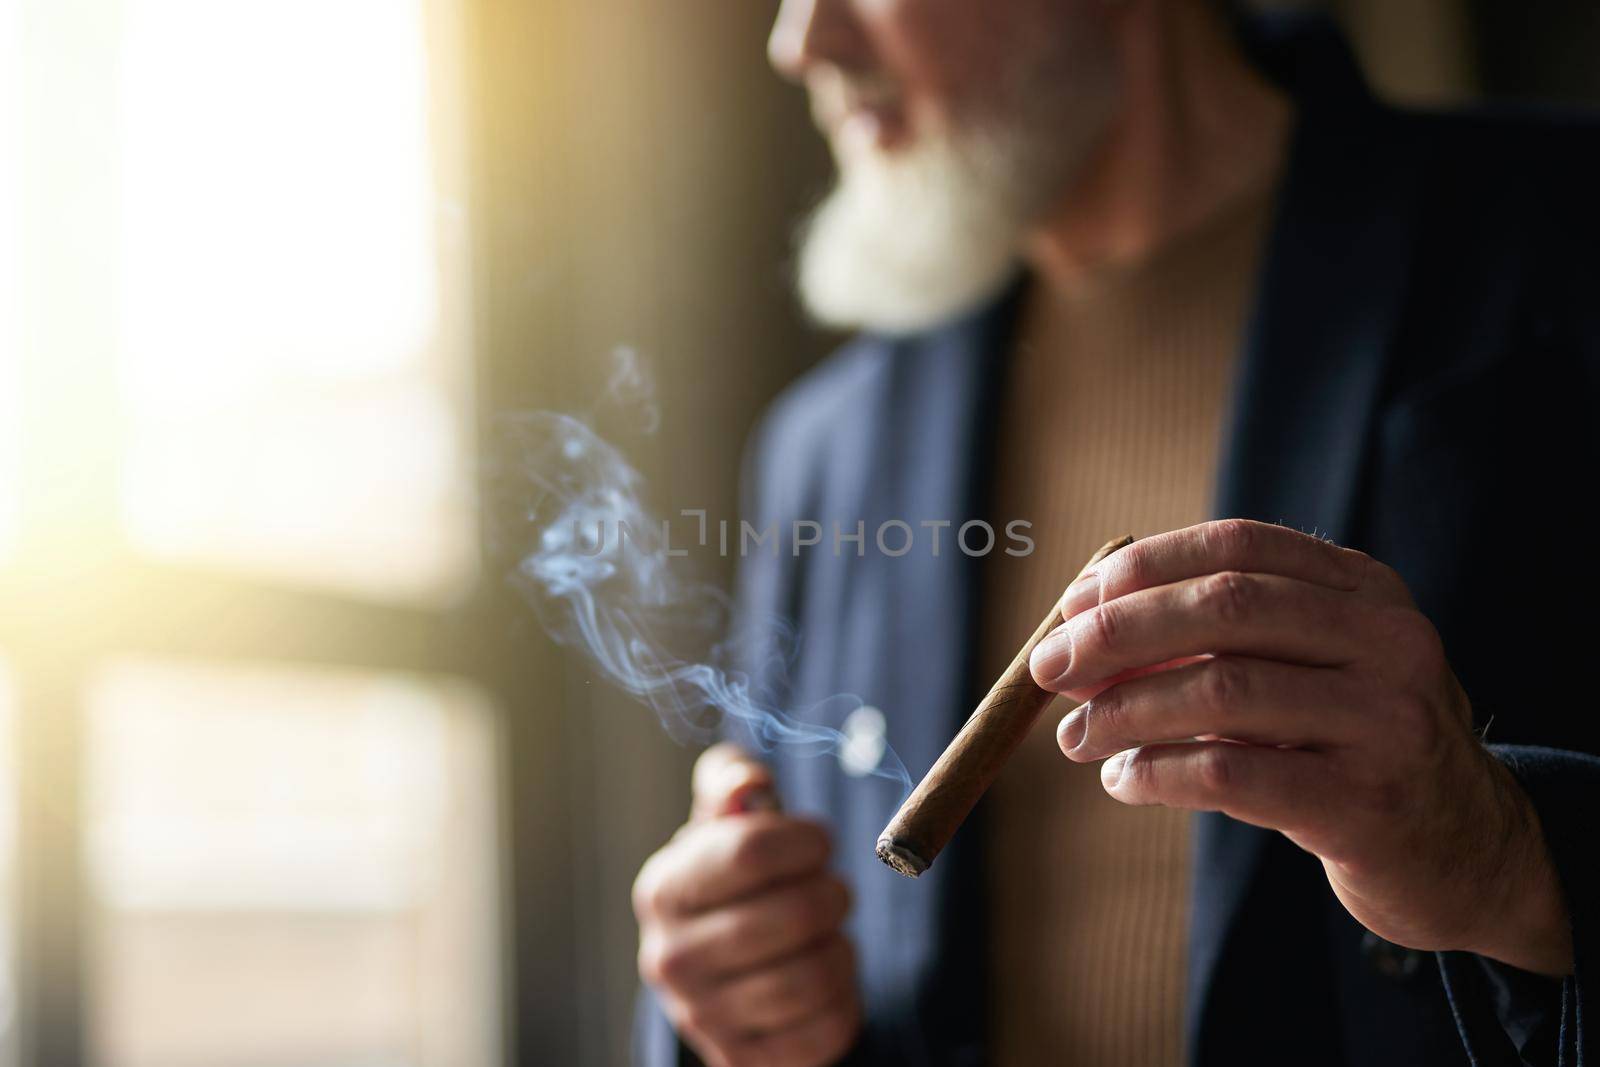 Close up shot of hands of elegant bearded mature man holding cigar while standing indoors. Lifestyle, success, people concept. Selective focus